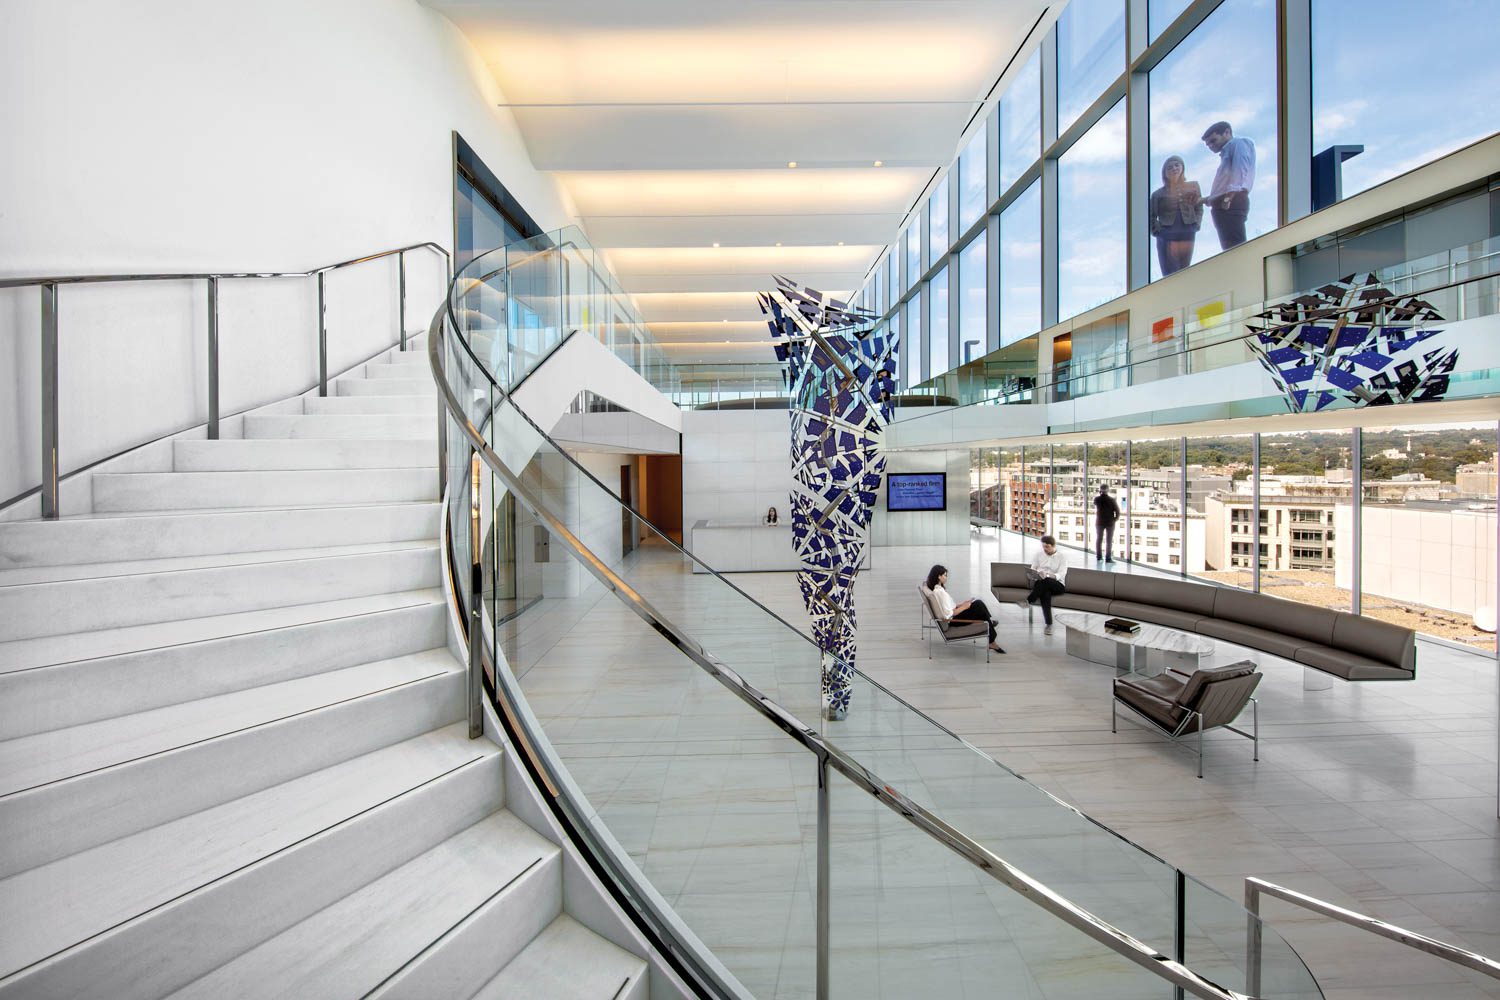 A Lasa staircase with balustrades of polished stainless steel and glass connects reception and the conference area, while the private Paul Hastings roof terrace overlooks the sculpture.